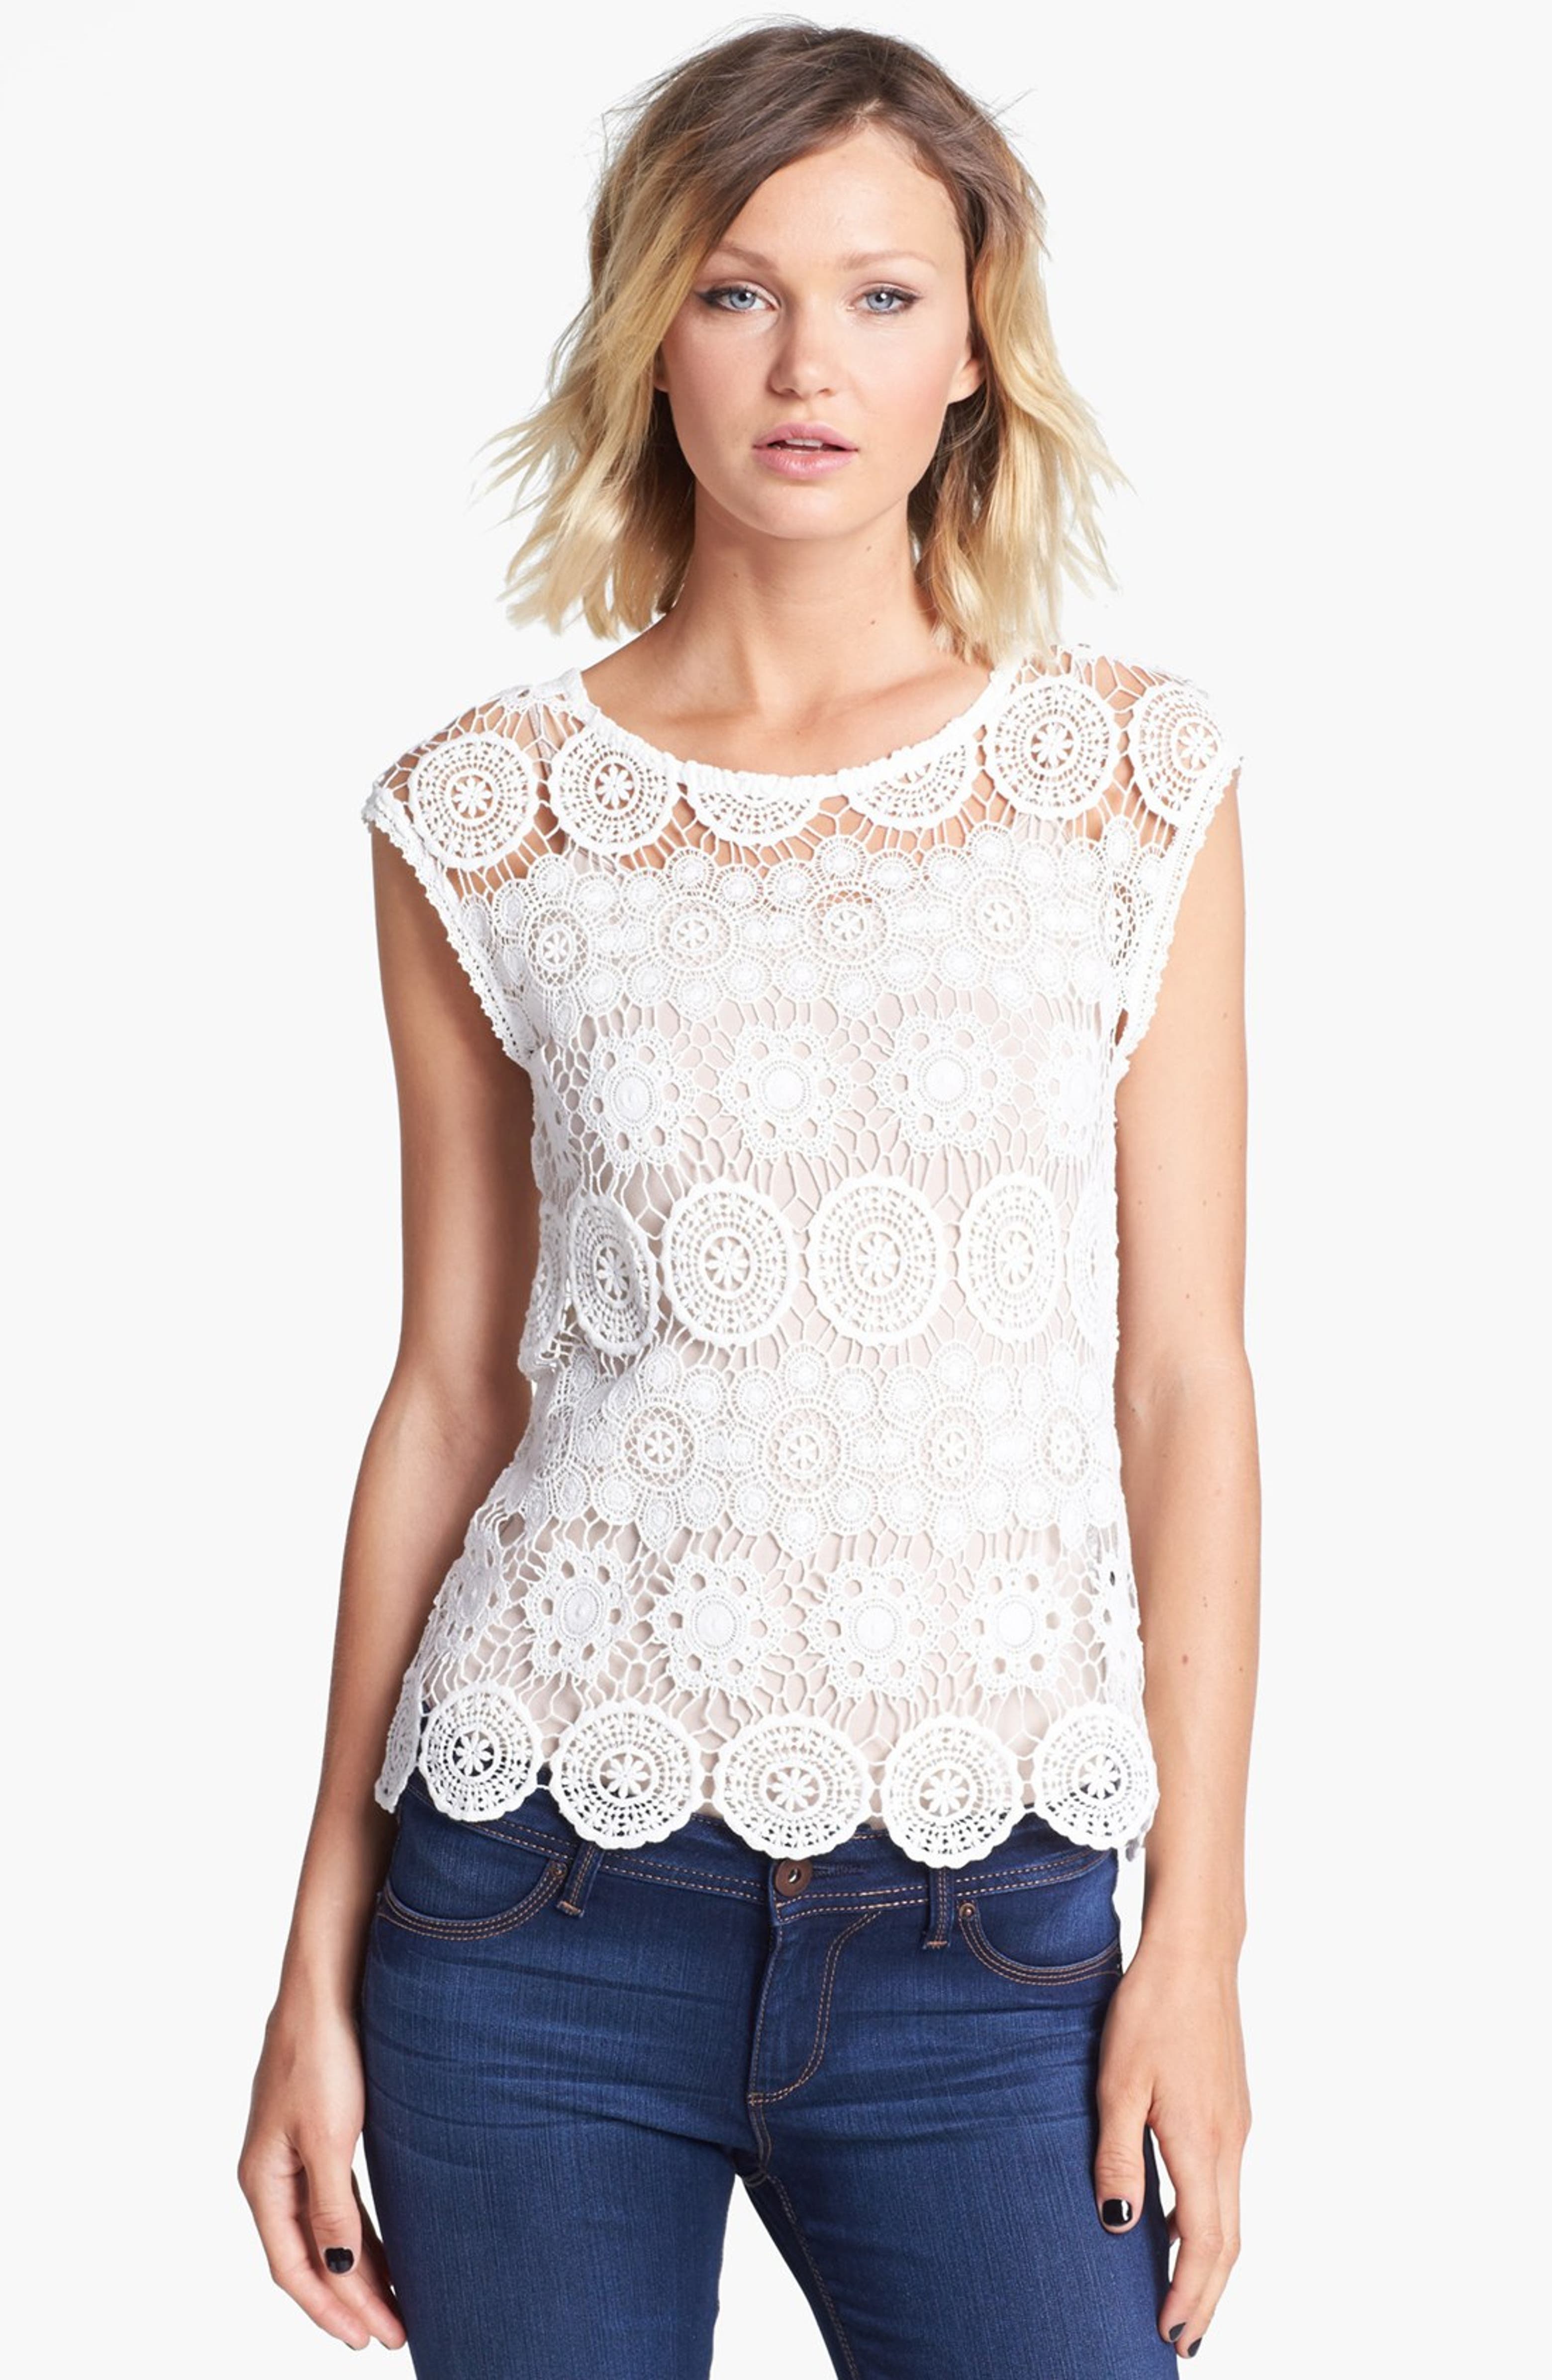 Sanctuary 'Bell' Crocheted Top | Nordstrom